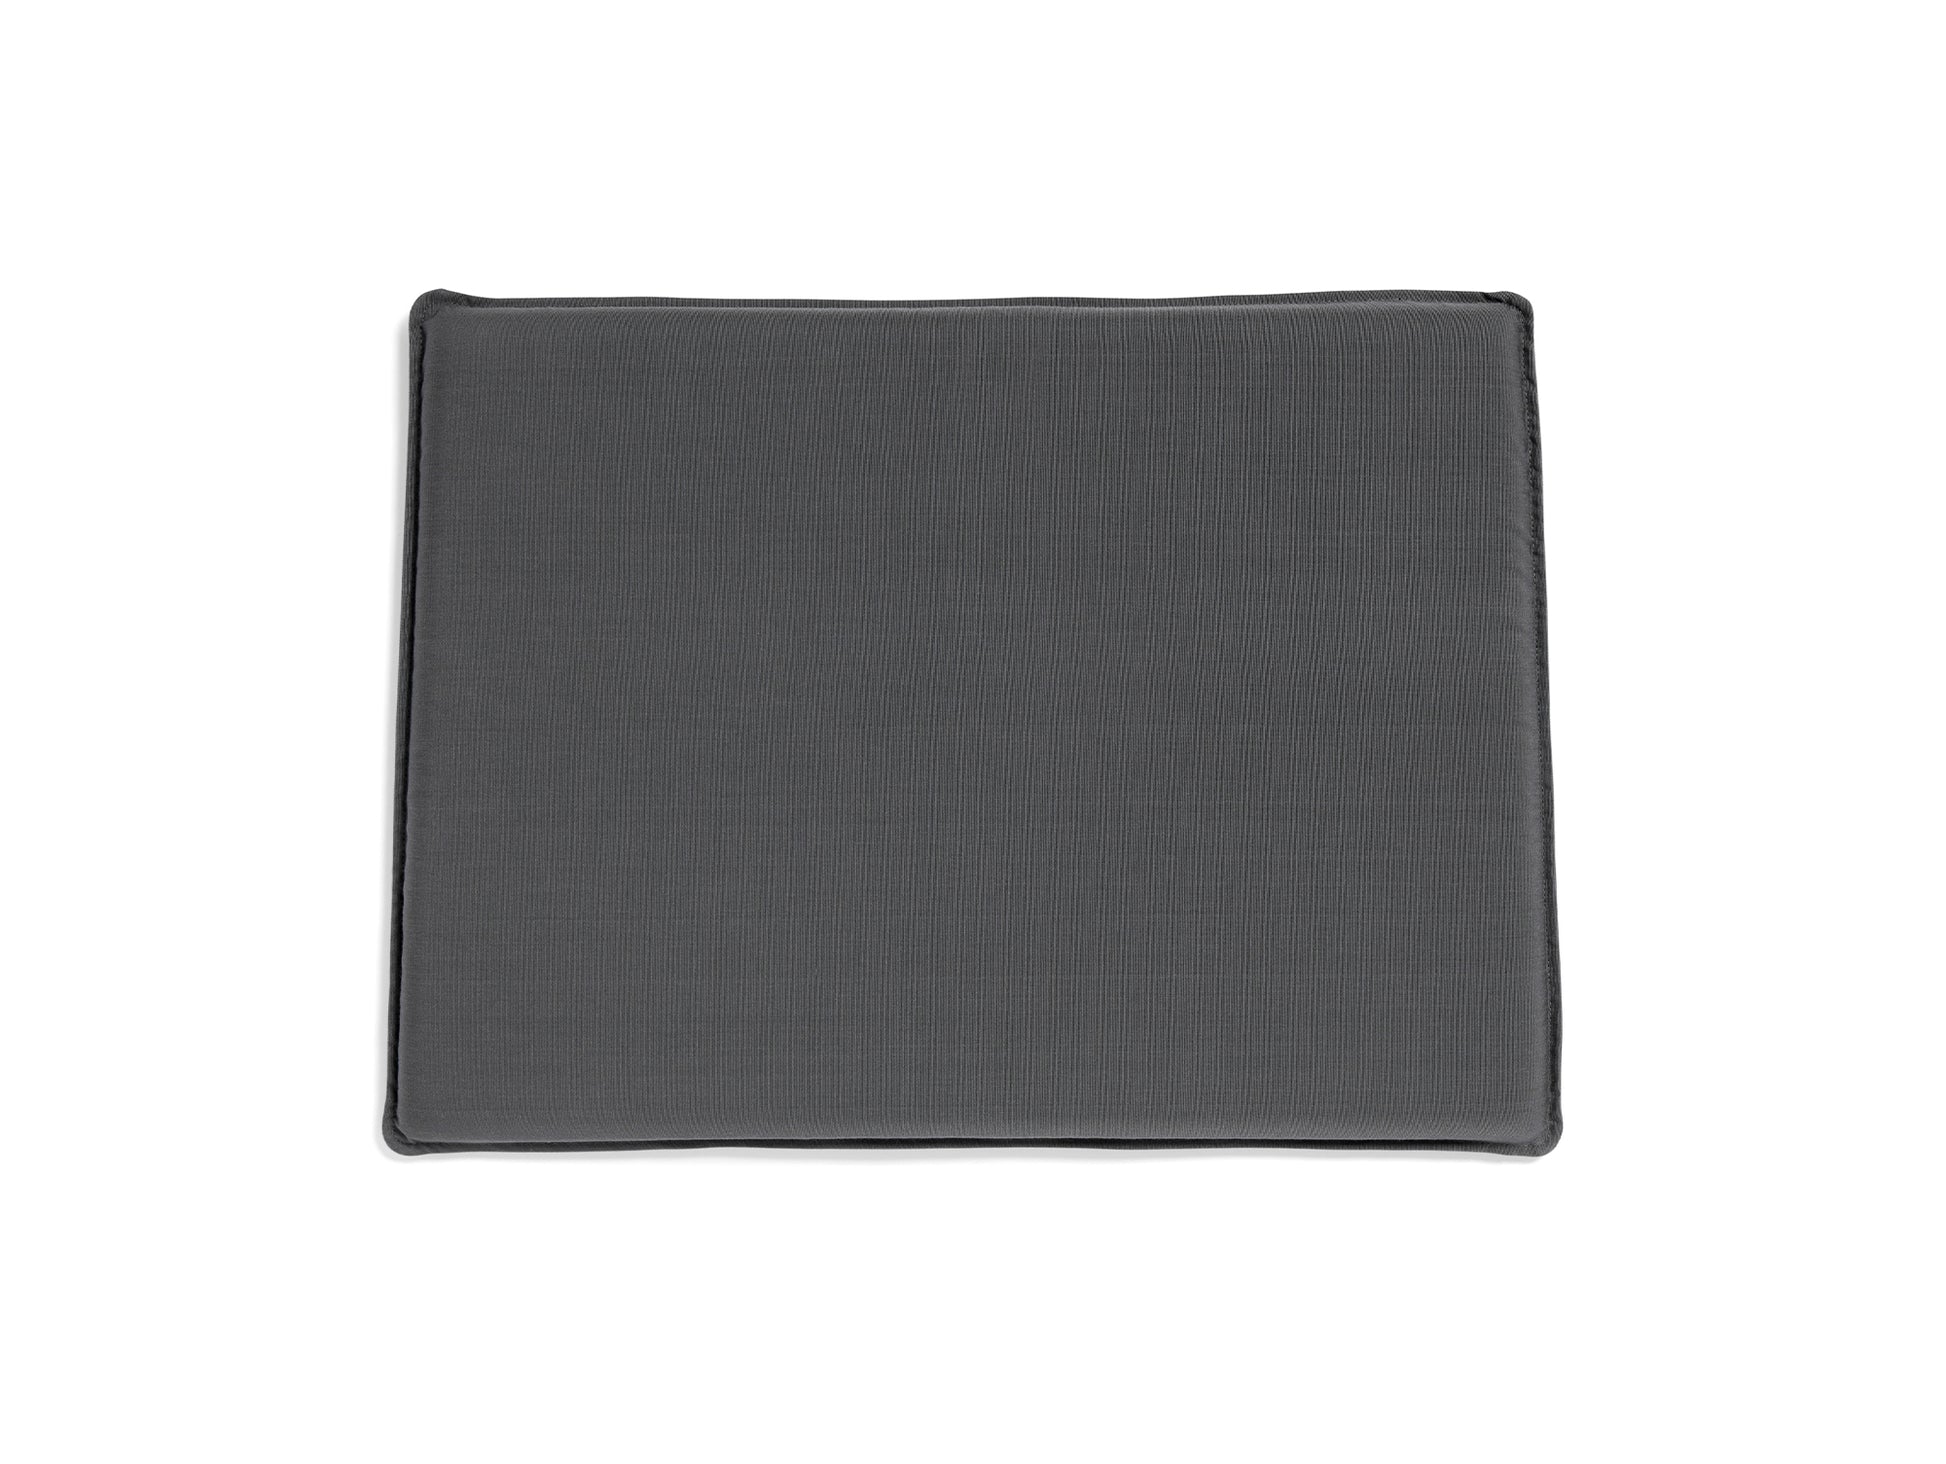 Hee Lounge Chair Seat Cushion by HAY - Anthracite Olefin